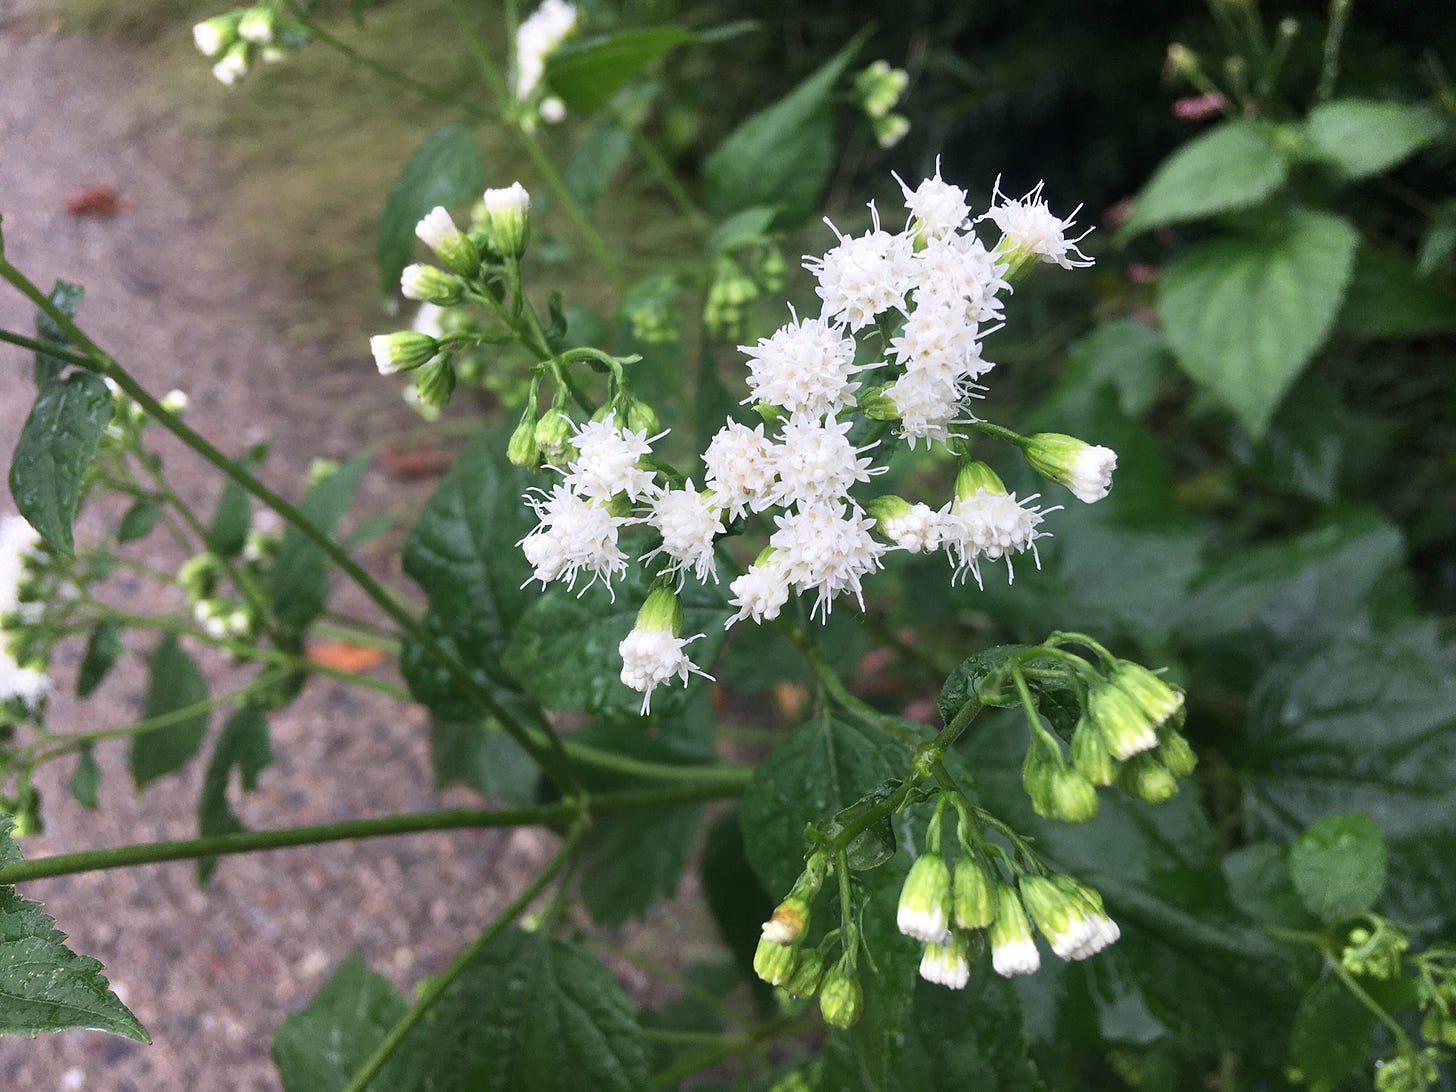 Small round white flowers in tight bunches over the sidewalk